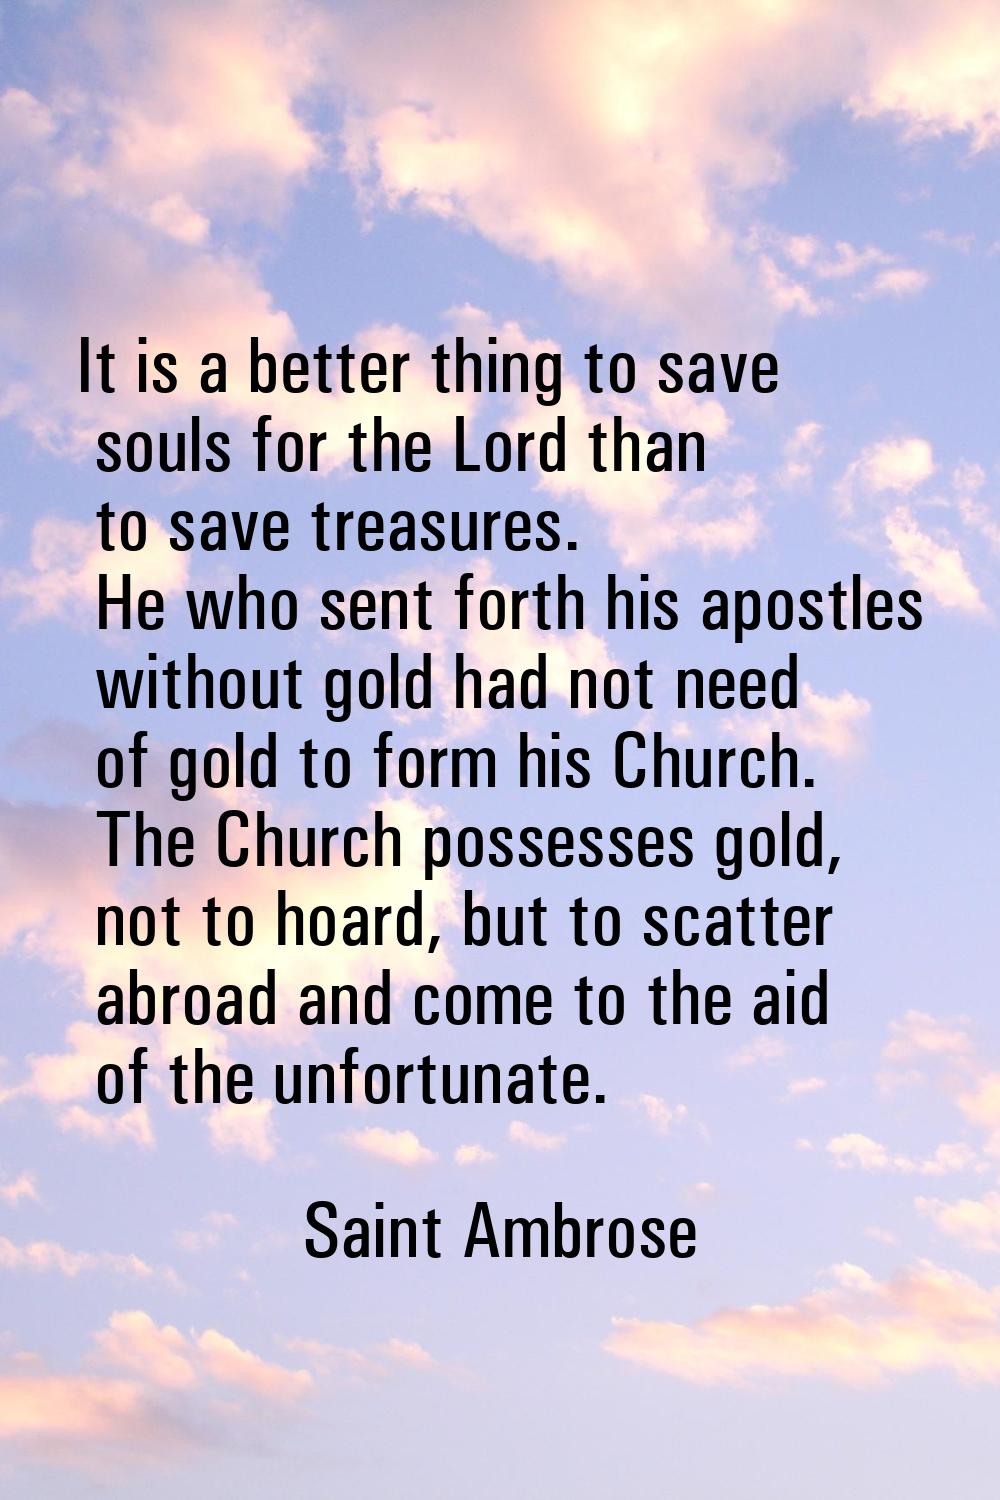 It is a better thing to save souls for the Lord than to save treasures. He who sent forth his apost